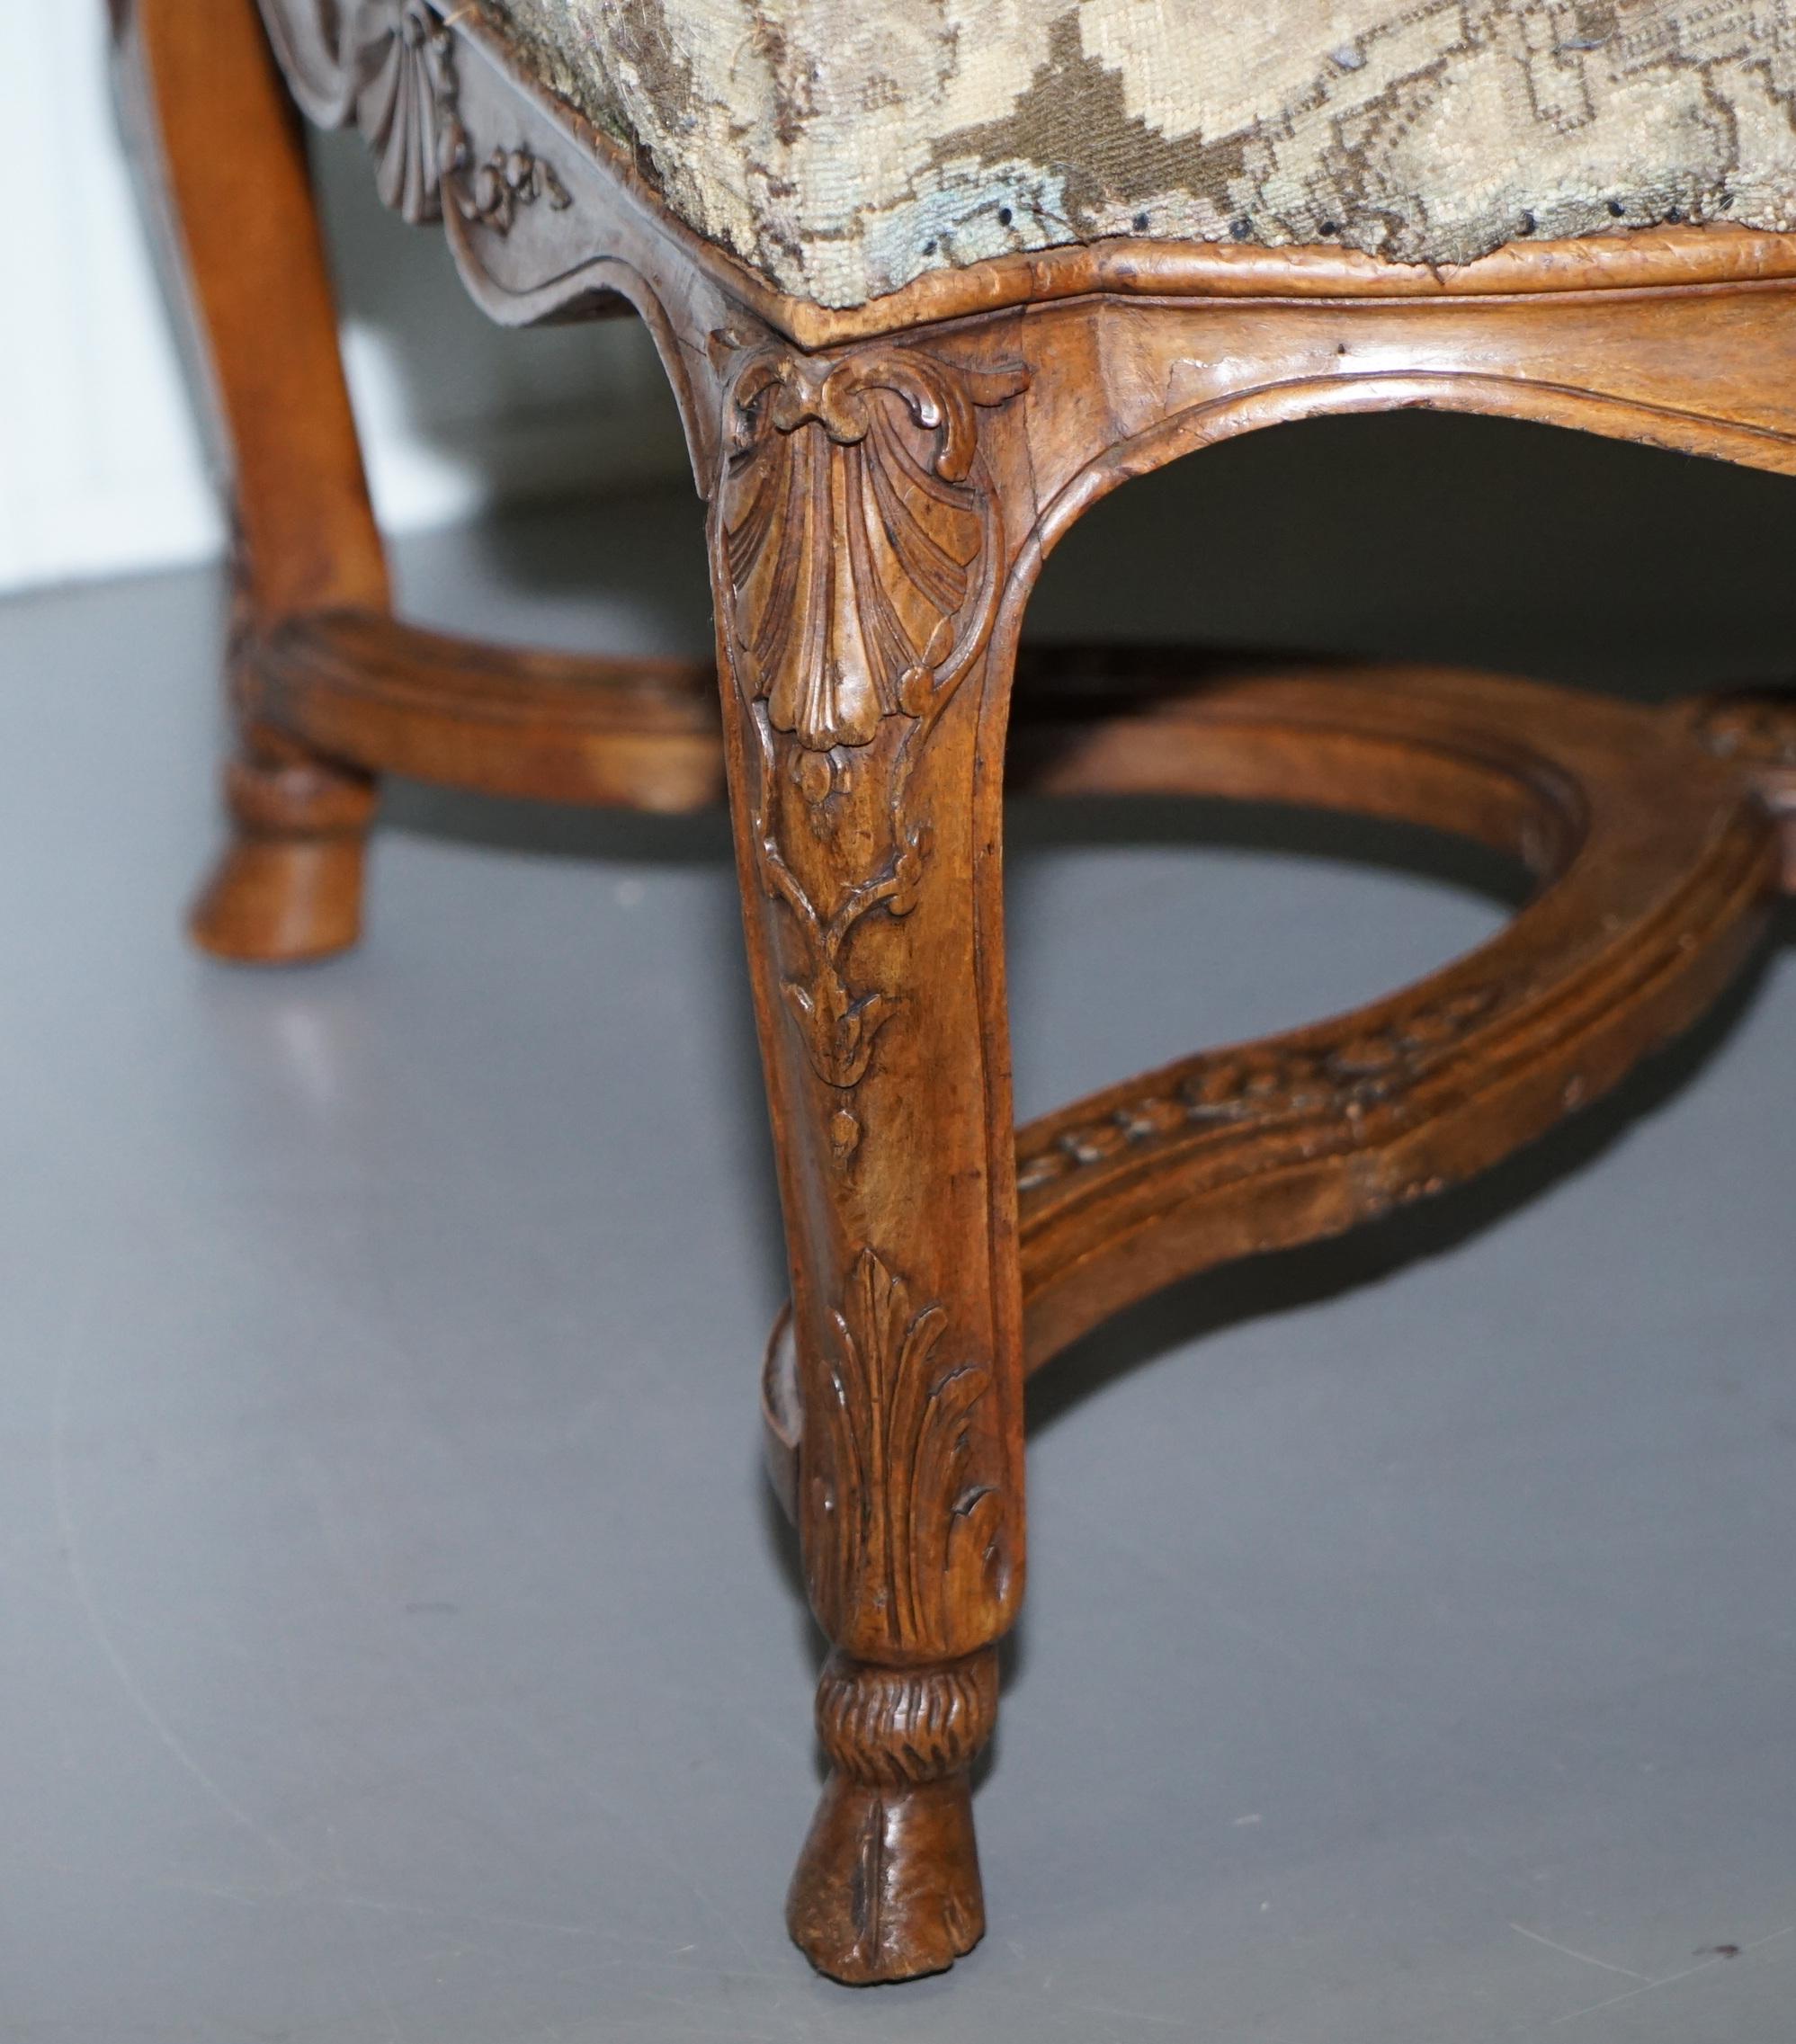 Rare 19th Century French Embroidered Armchair Ornately Carved Frame High Back For Sale 5